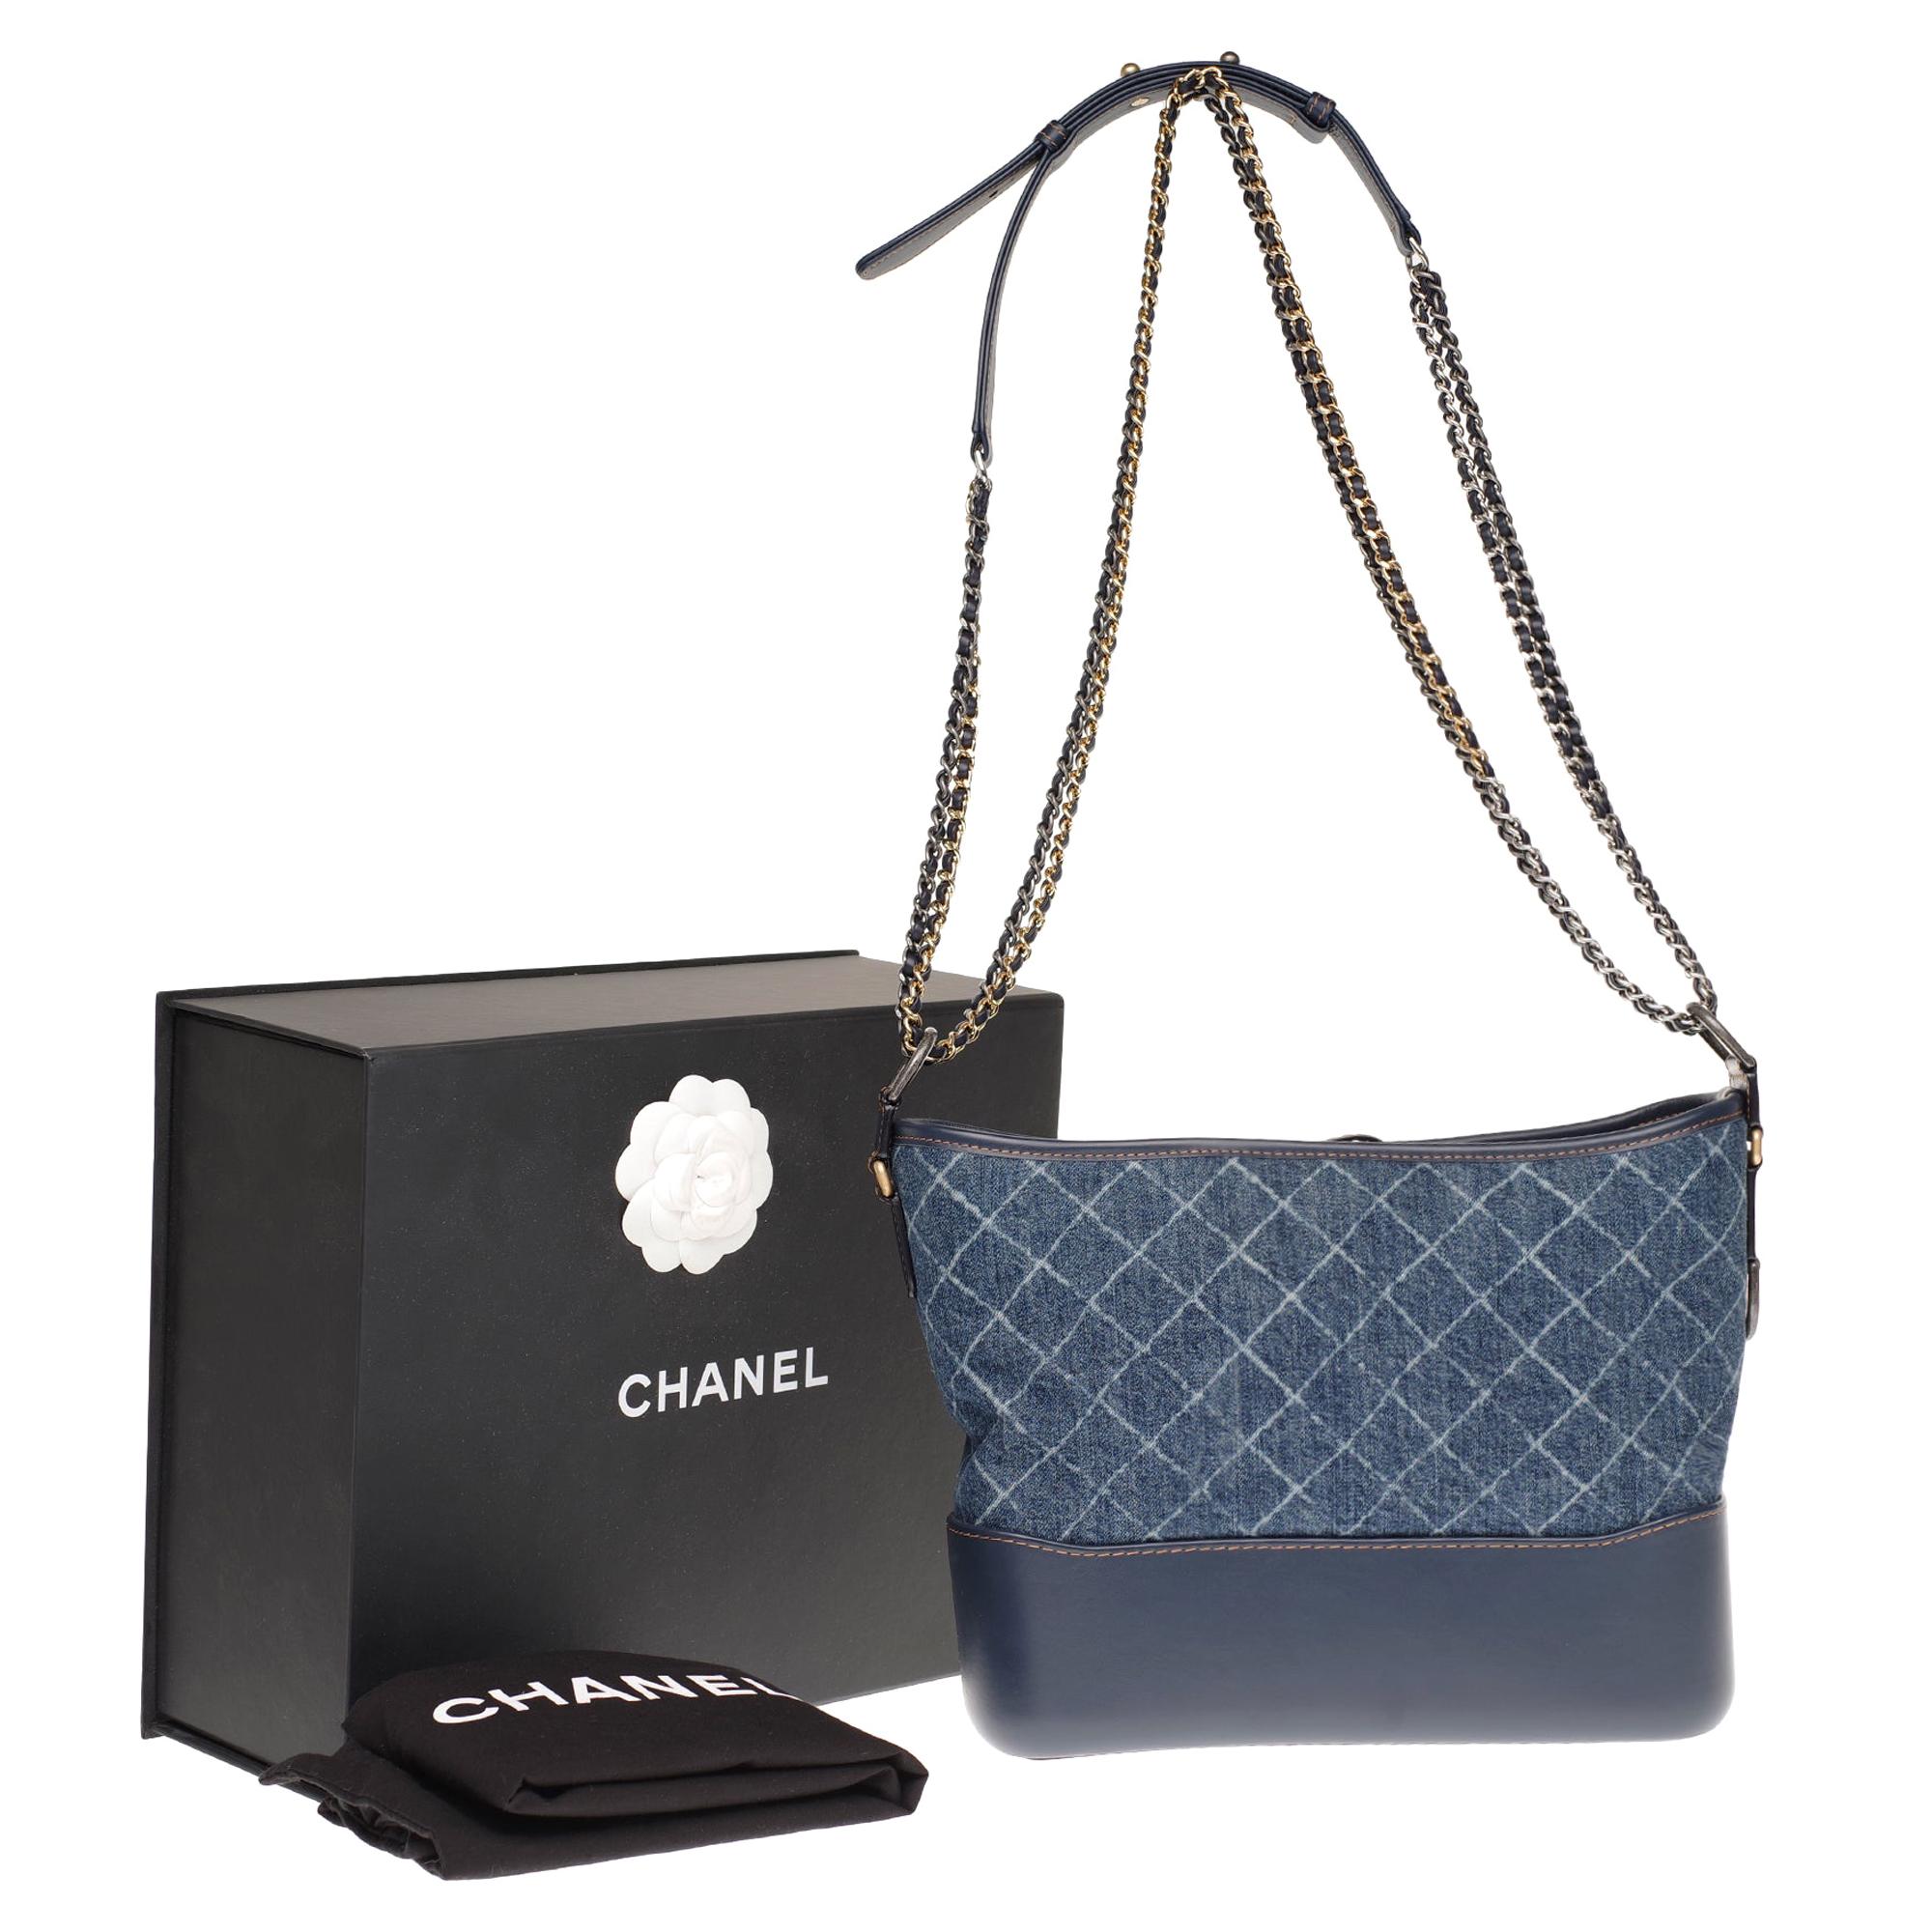 Chanel Gabrielle small size hobo bag in denim with gold and silver